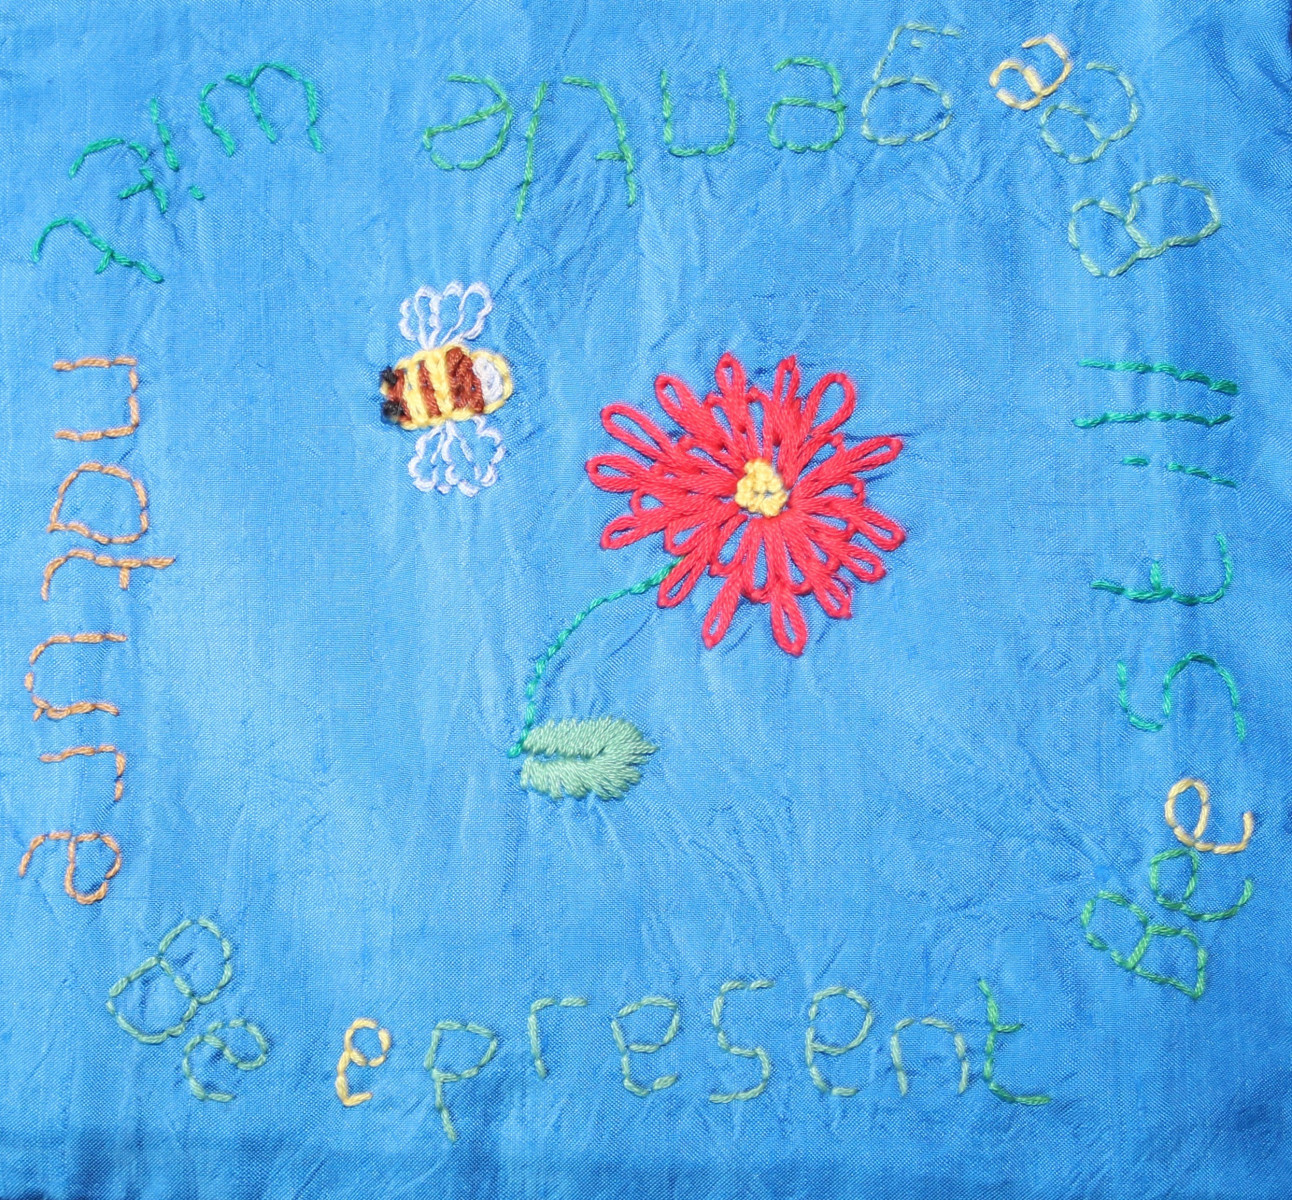 Embroidery of bee, flower and a saying